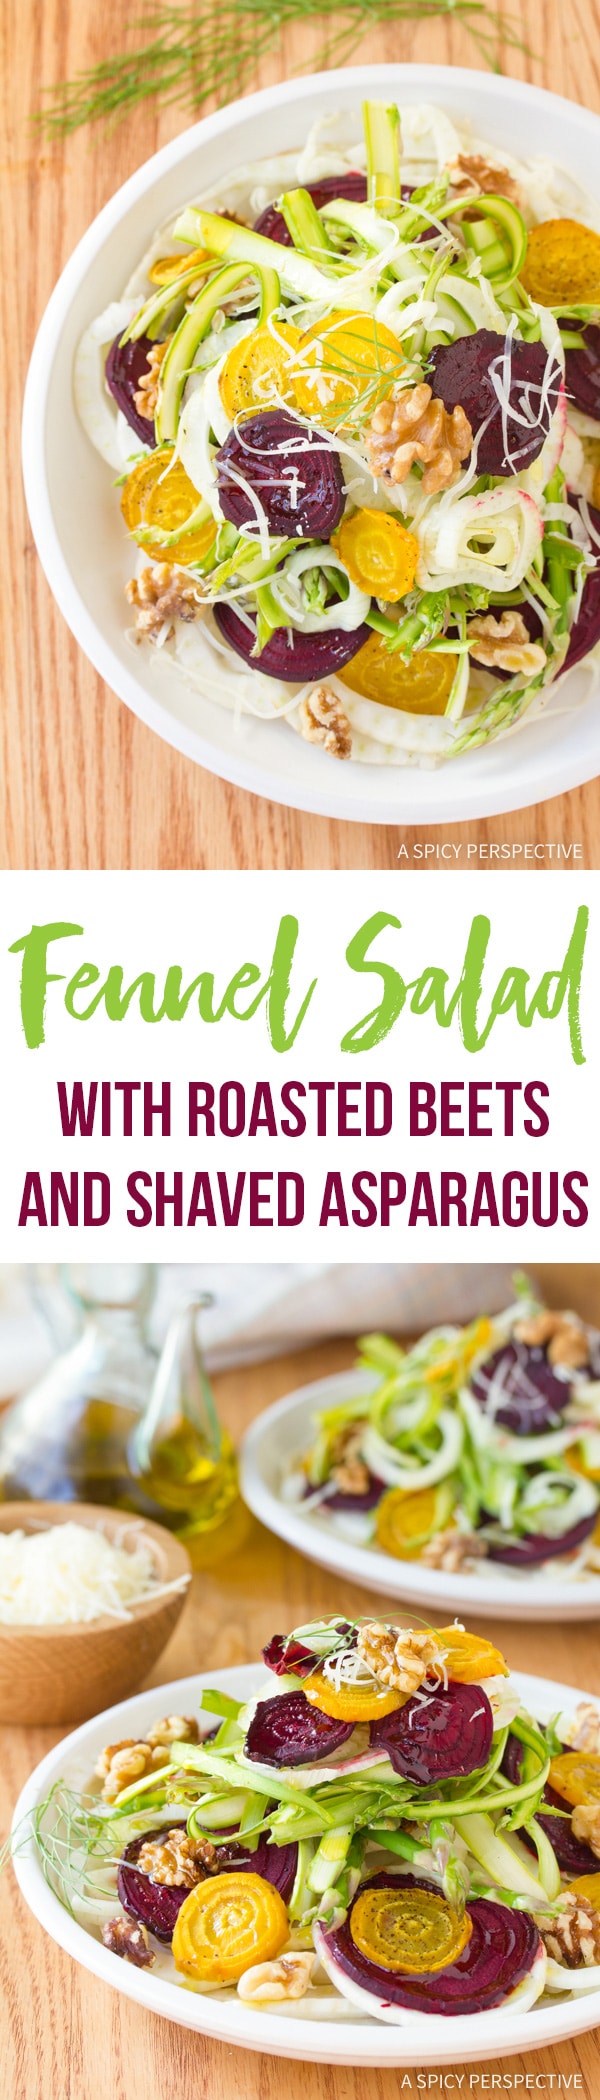 Fresh Fennel Salad with Roasted Beets and Shaved Asparagus Recipe